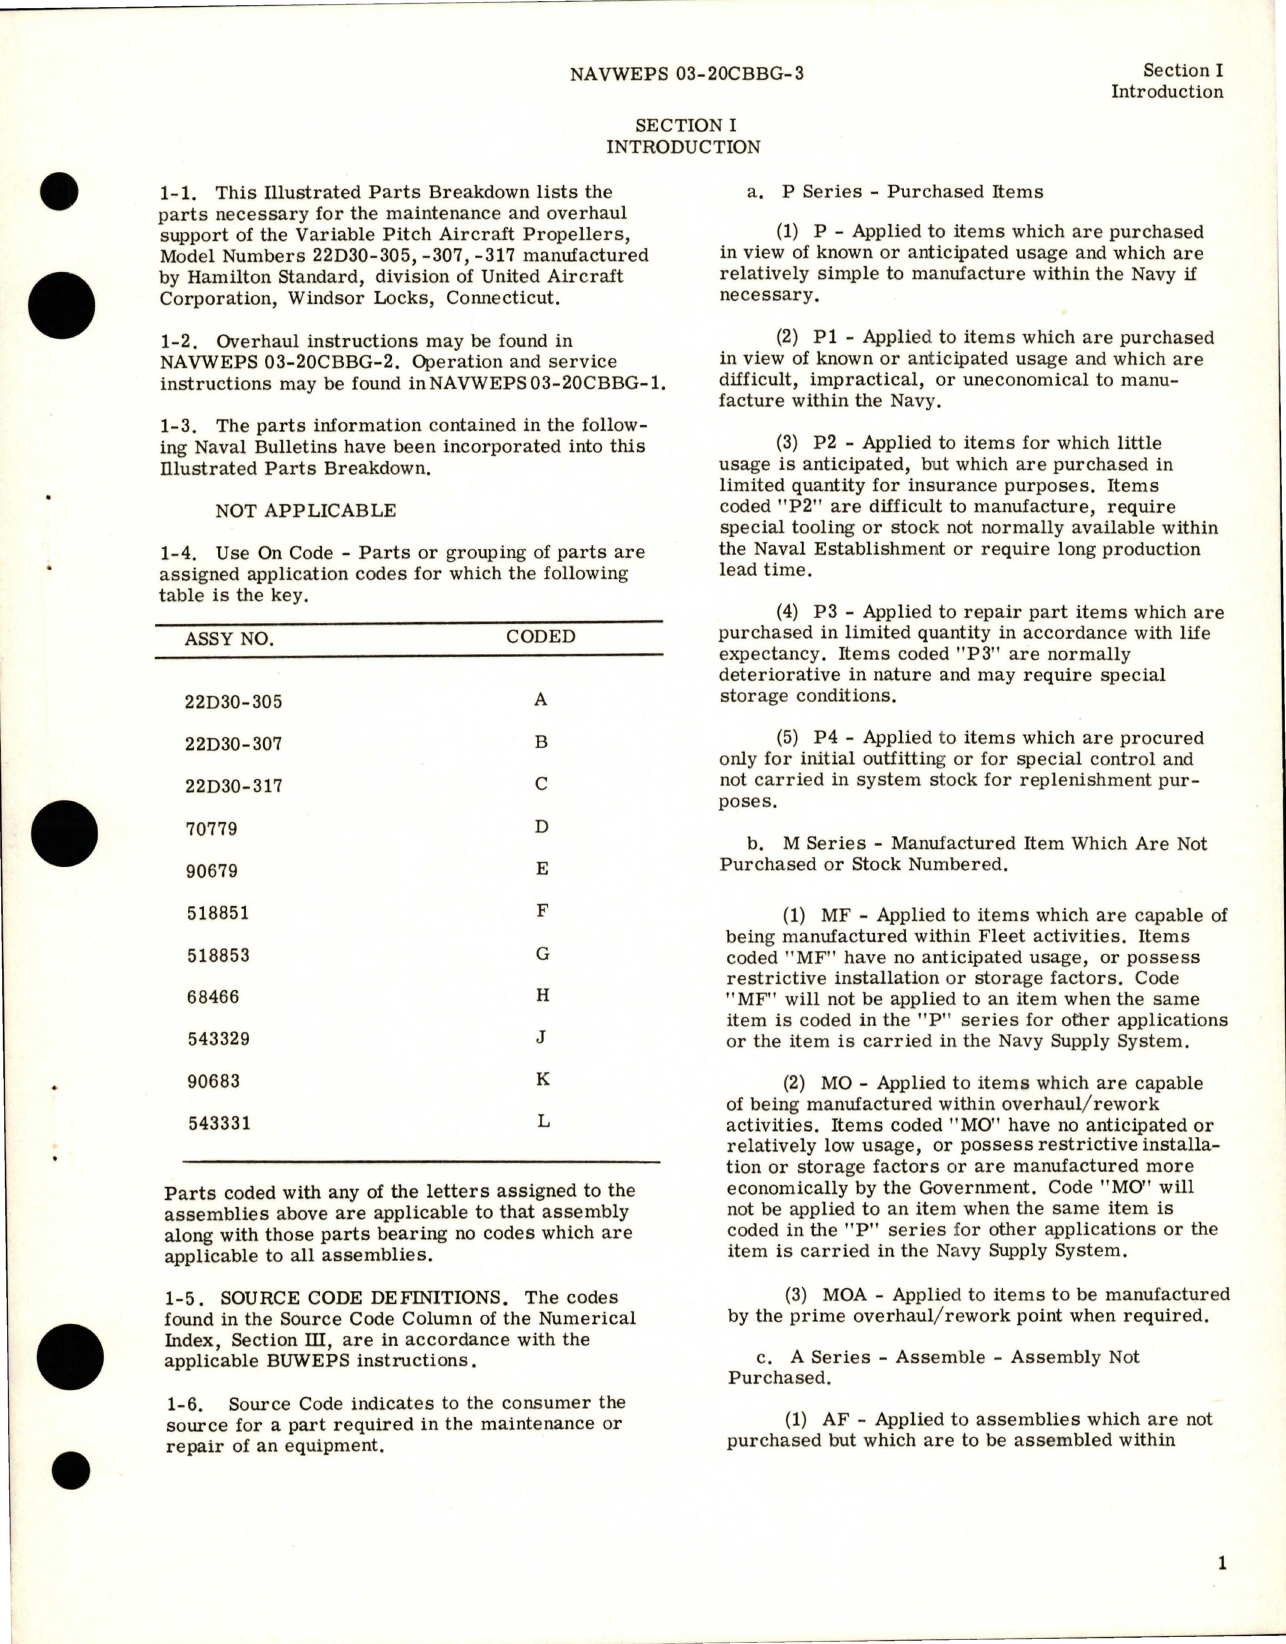 Sample page 5 from AirCorps Library document: Illustrated Parts Breakdown for Variable Pitch Propeller - Models 22D30-305, 22D30-307, and 22D30-317